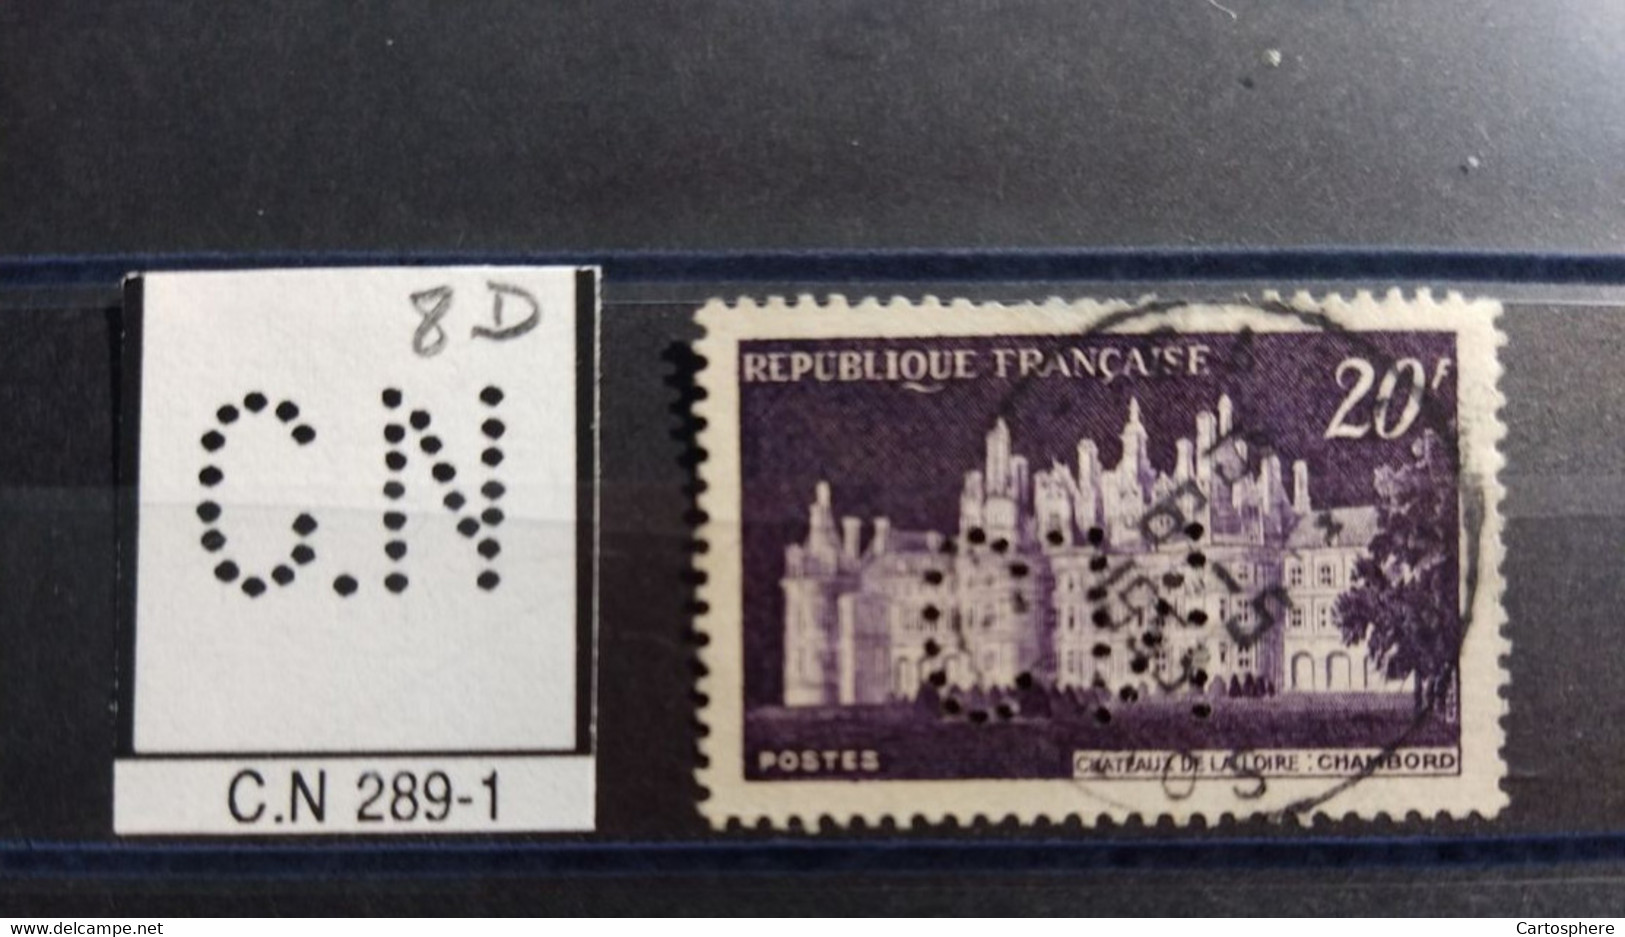 FRANCE TIMBRE C.N 289-1 INDICE 8 SUR GAUDON  PERFORE PERFORES PERFIN PERFINS PERFO PERFORATION PERFORIERT - Used Stamps